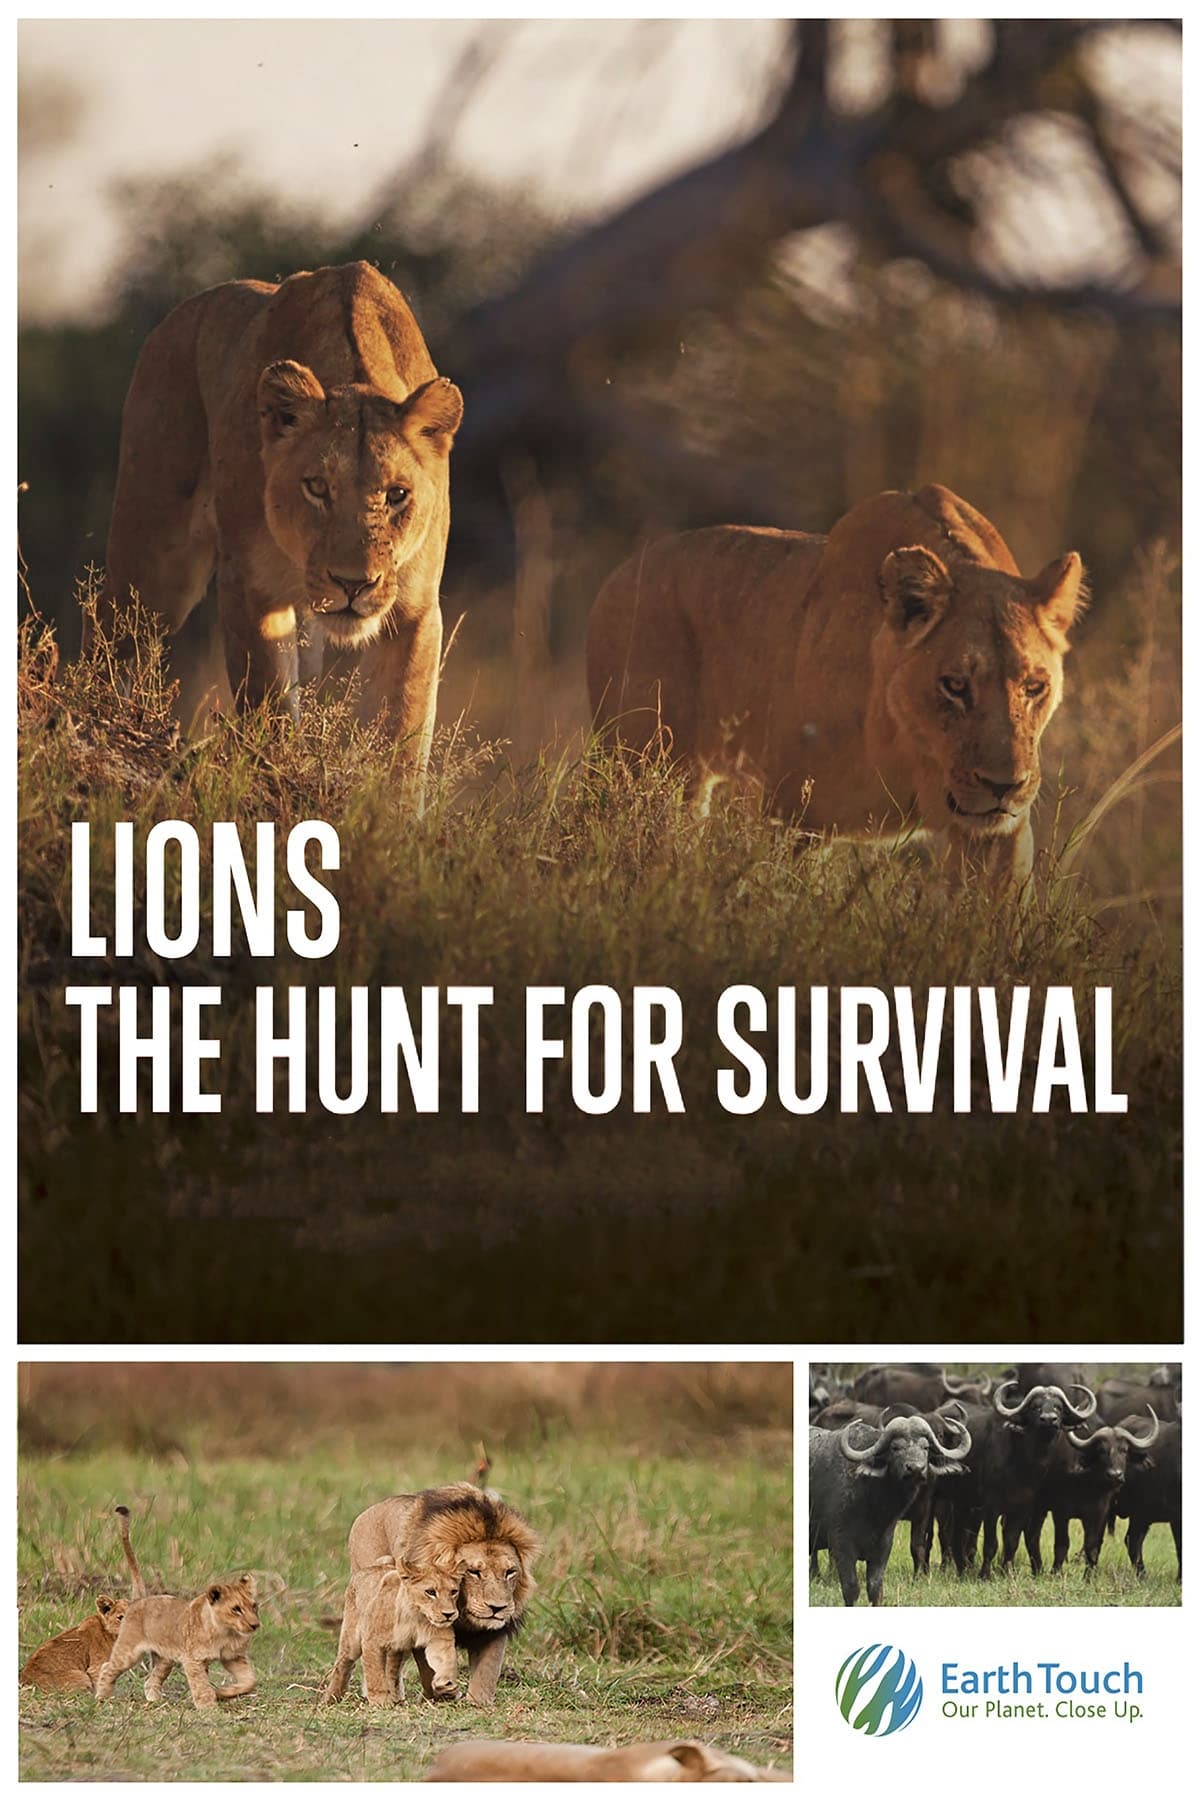 Lions: The Hunt for Survival